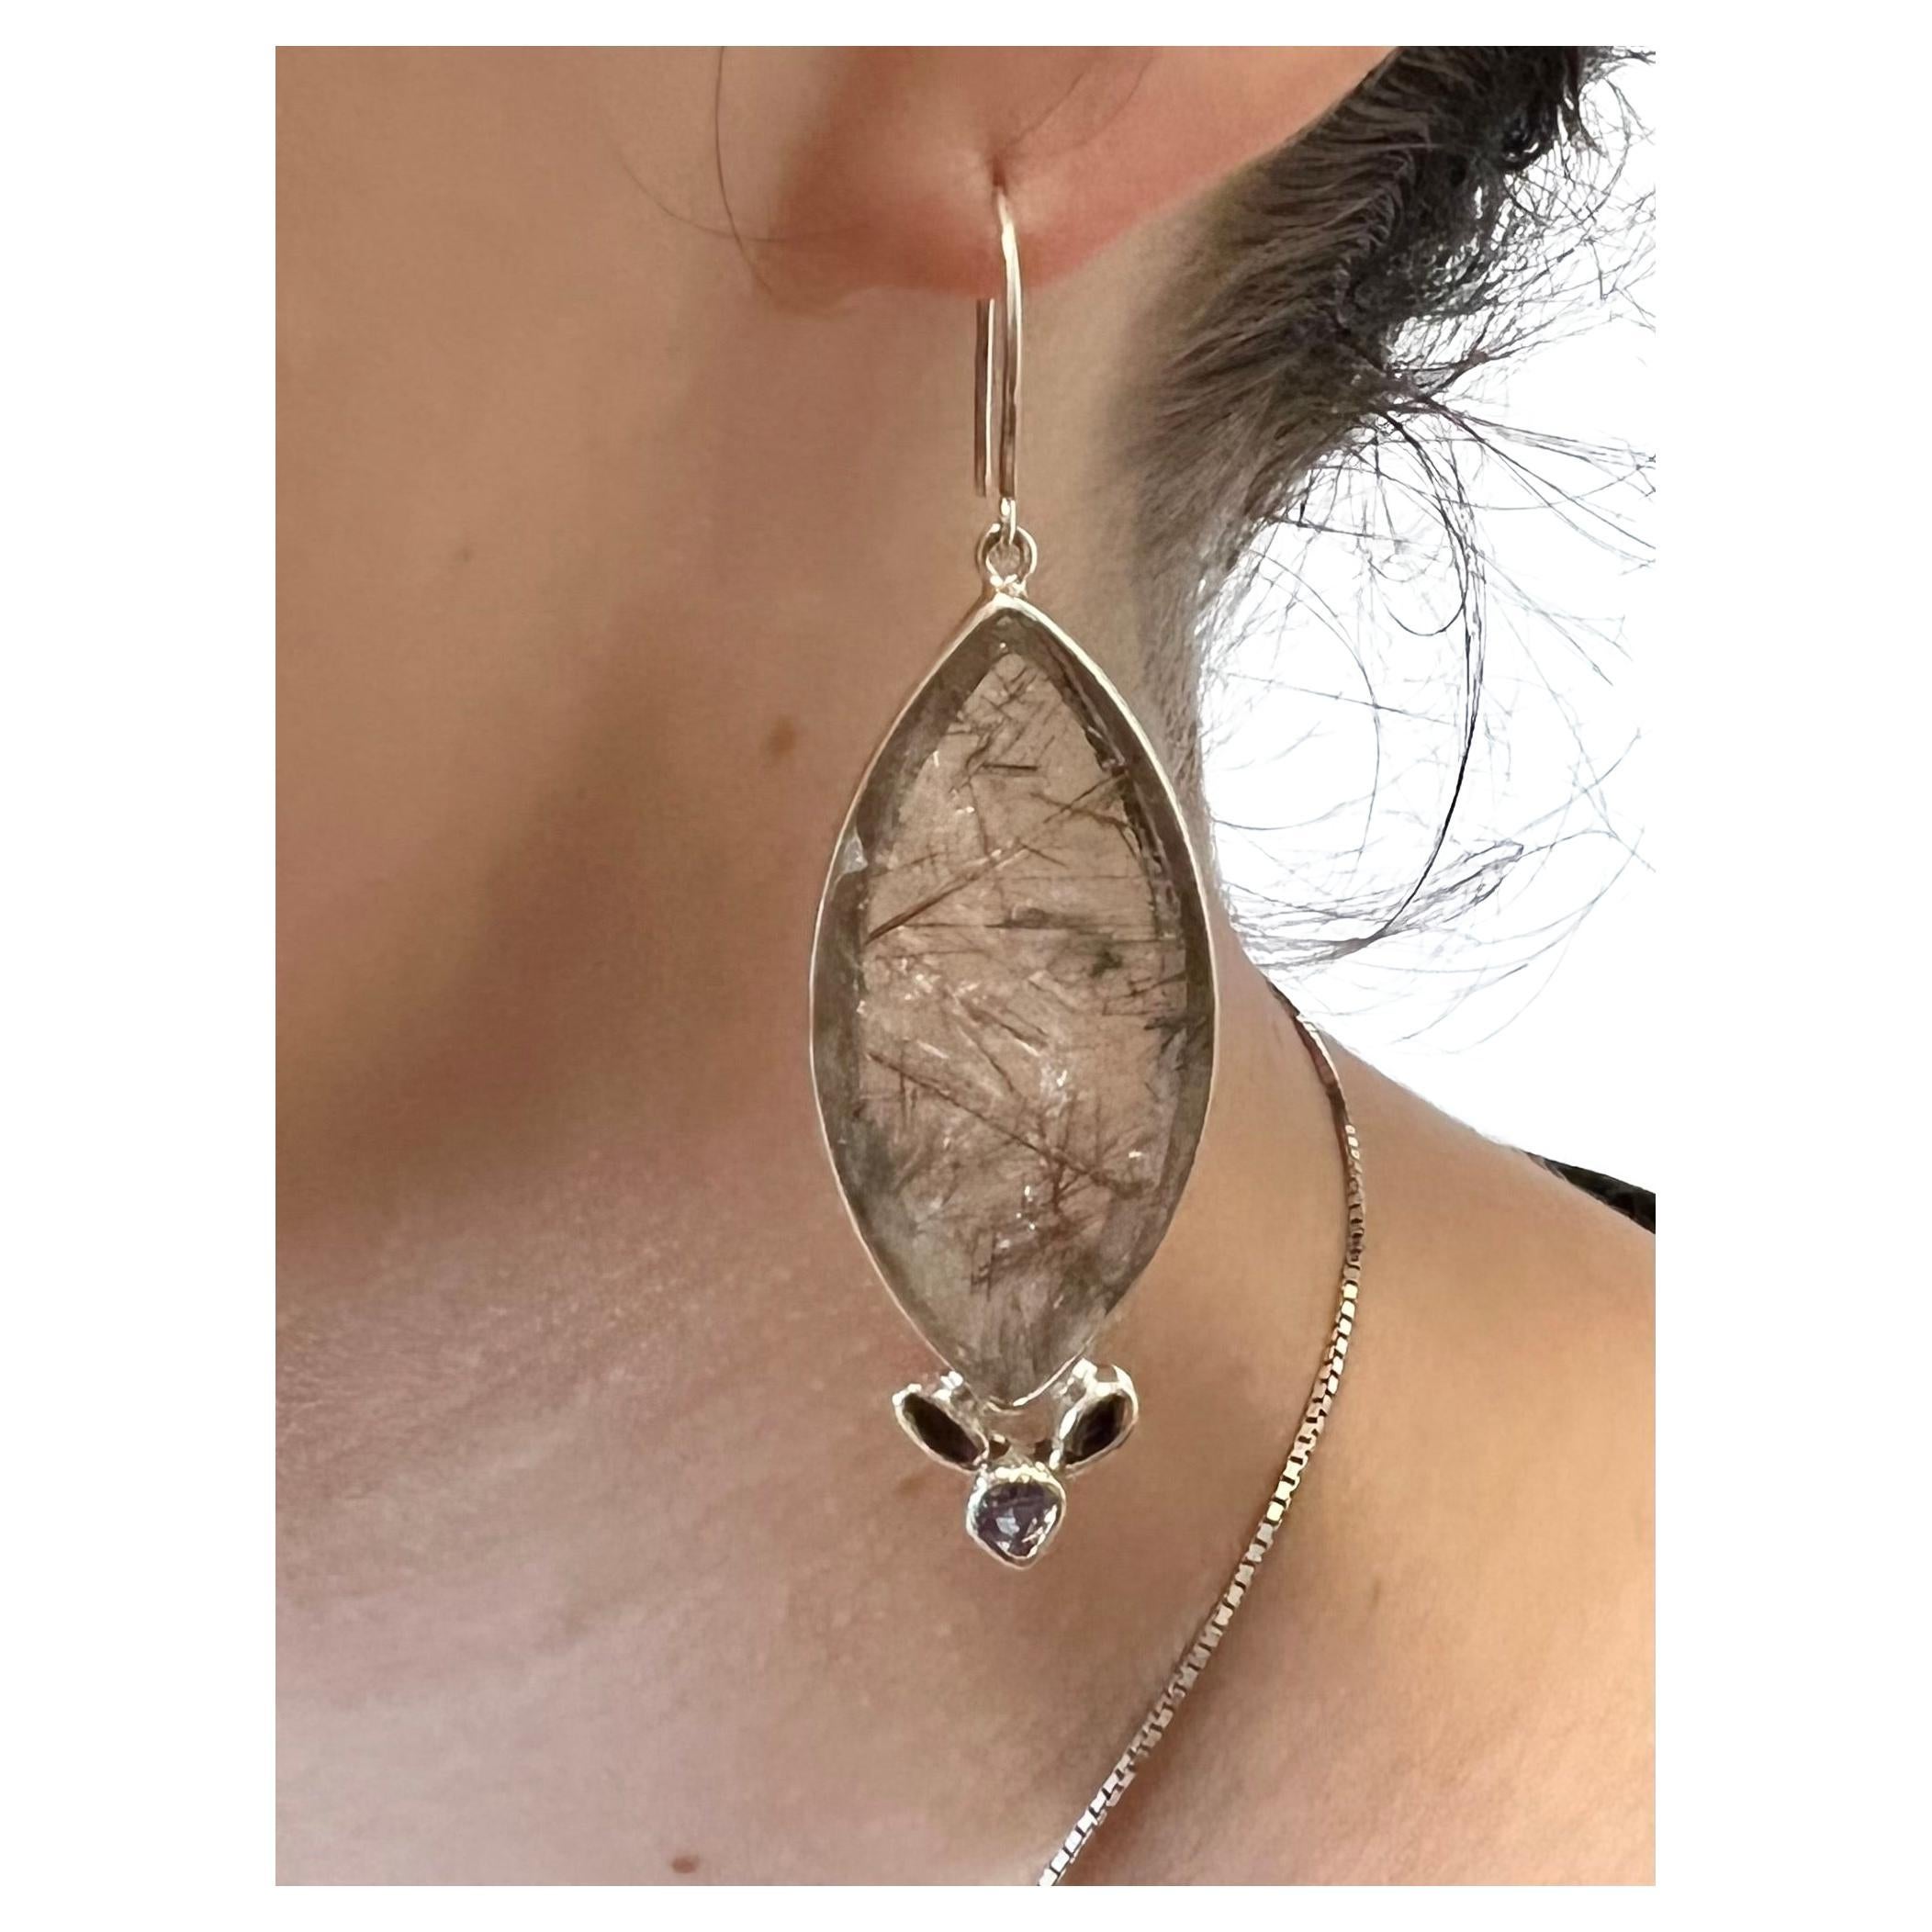 These earrings are one of our original designs. We collaborate with a master silversmith in Kotegeti, Java, the heart of the silver industry in Indonesia, to create these one of kind pieces. The beautifully translucent quartz with long, narrow